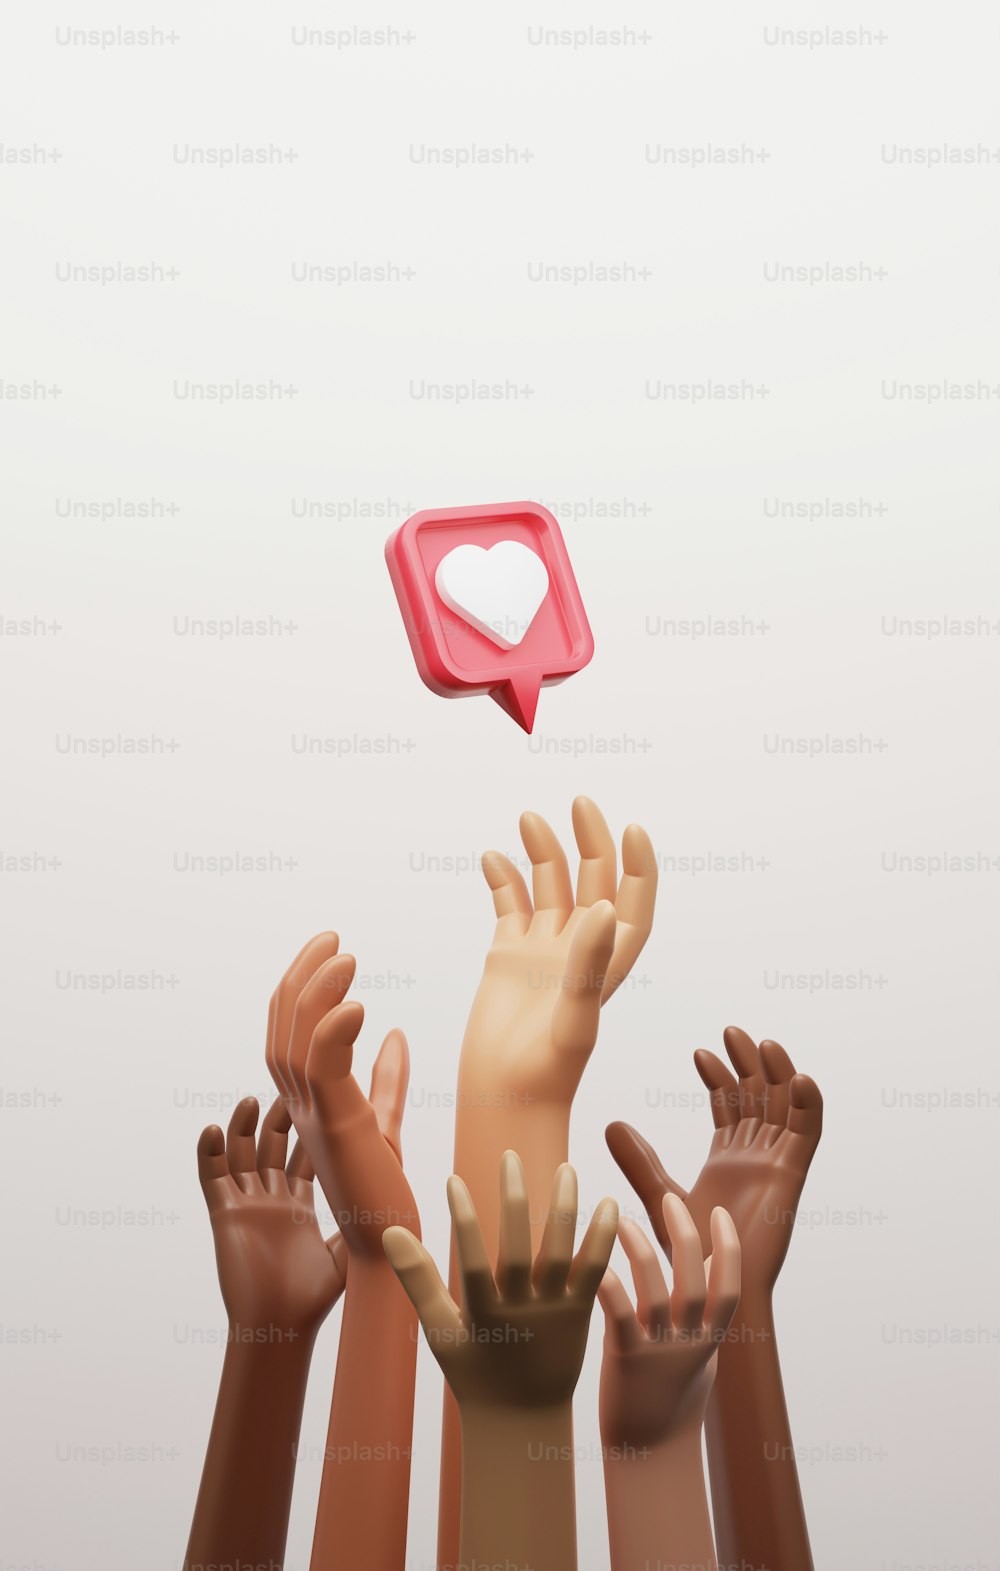 Multi-ethnic group reaches out to heart icon on red pin
Fame Competition and acceptance on social media. 3D render illustration.